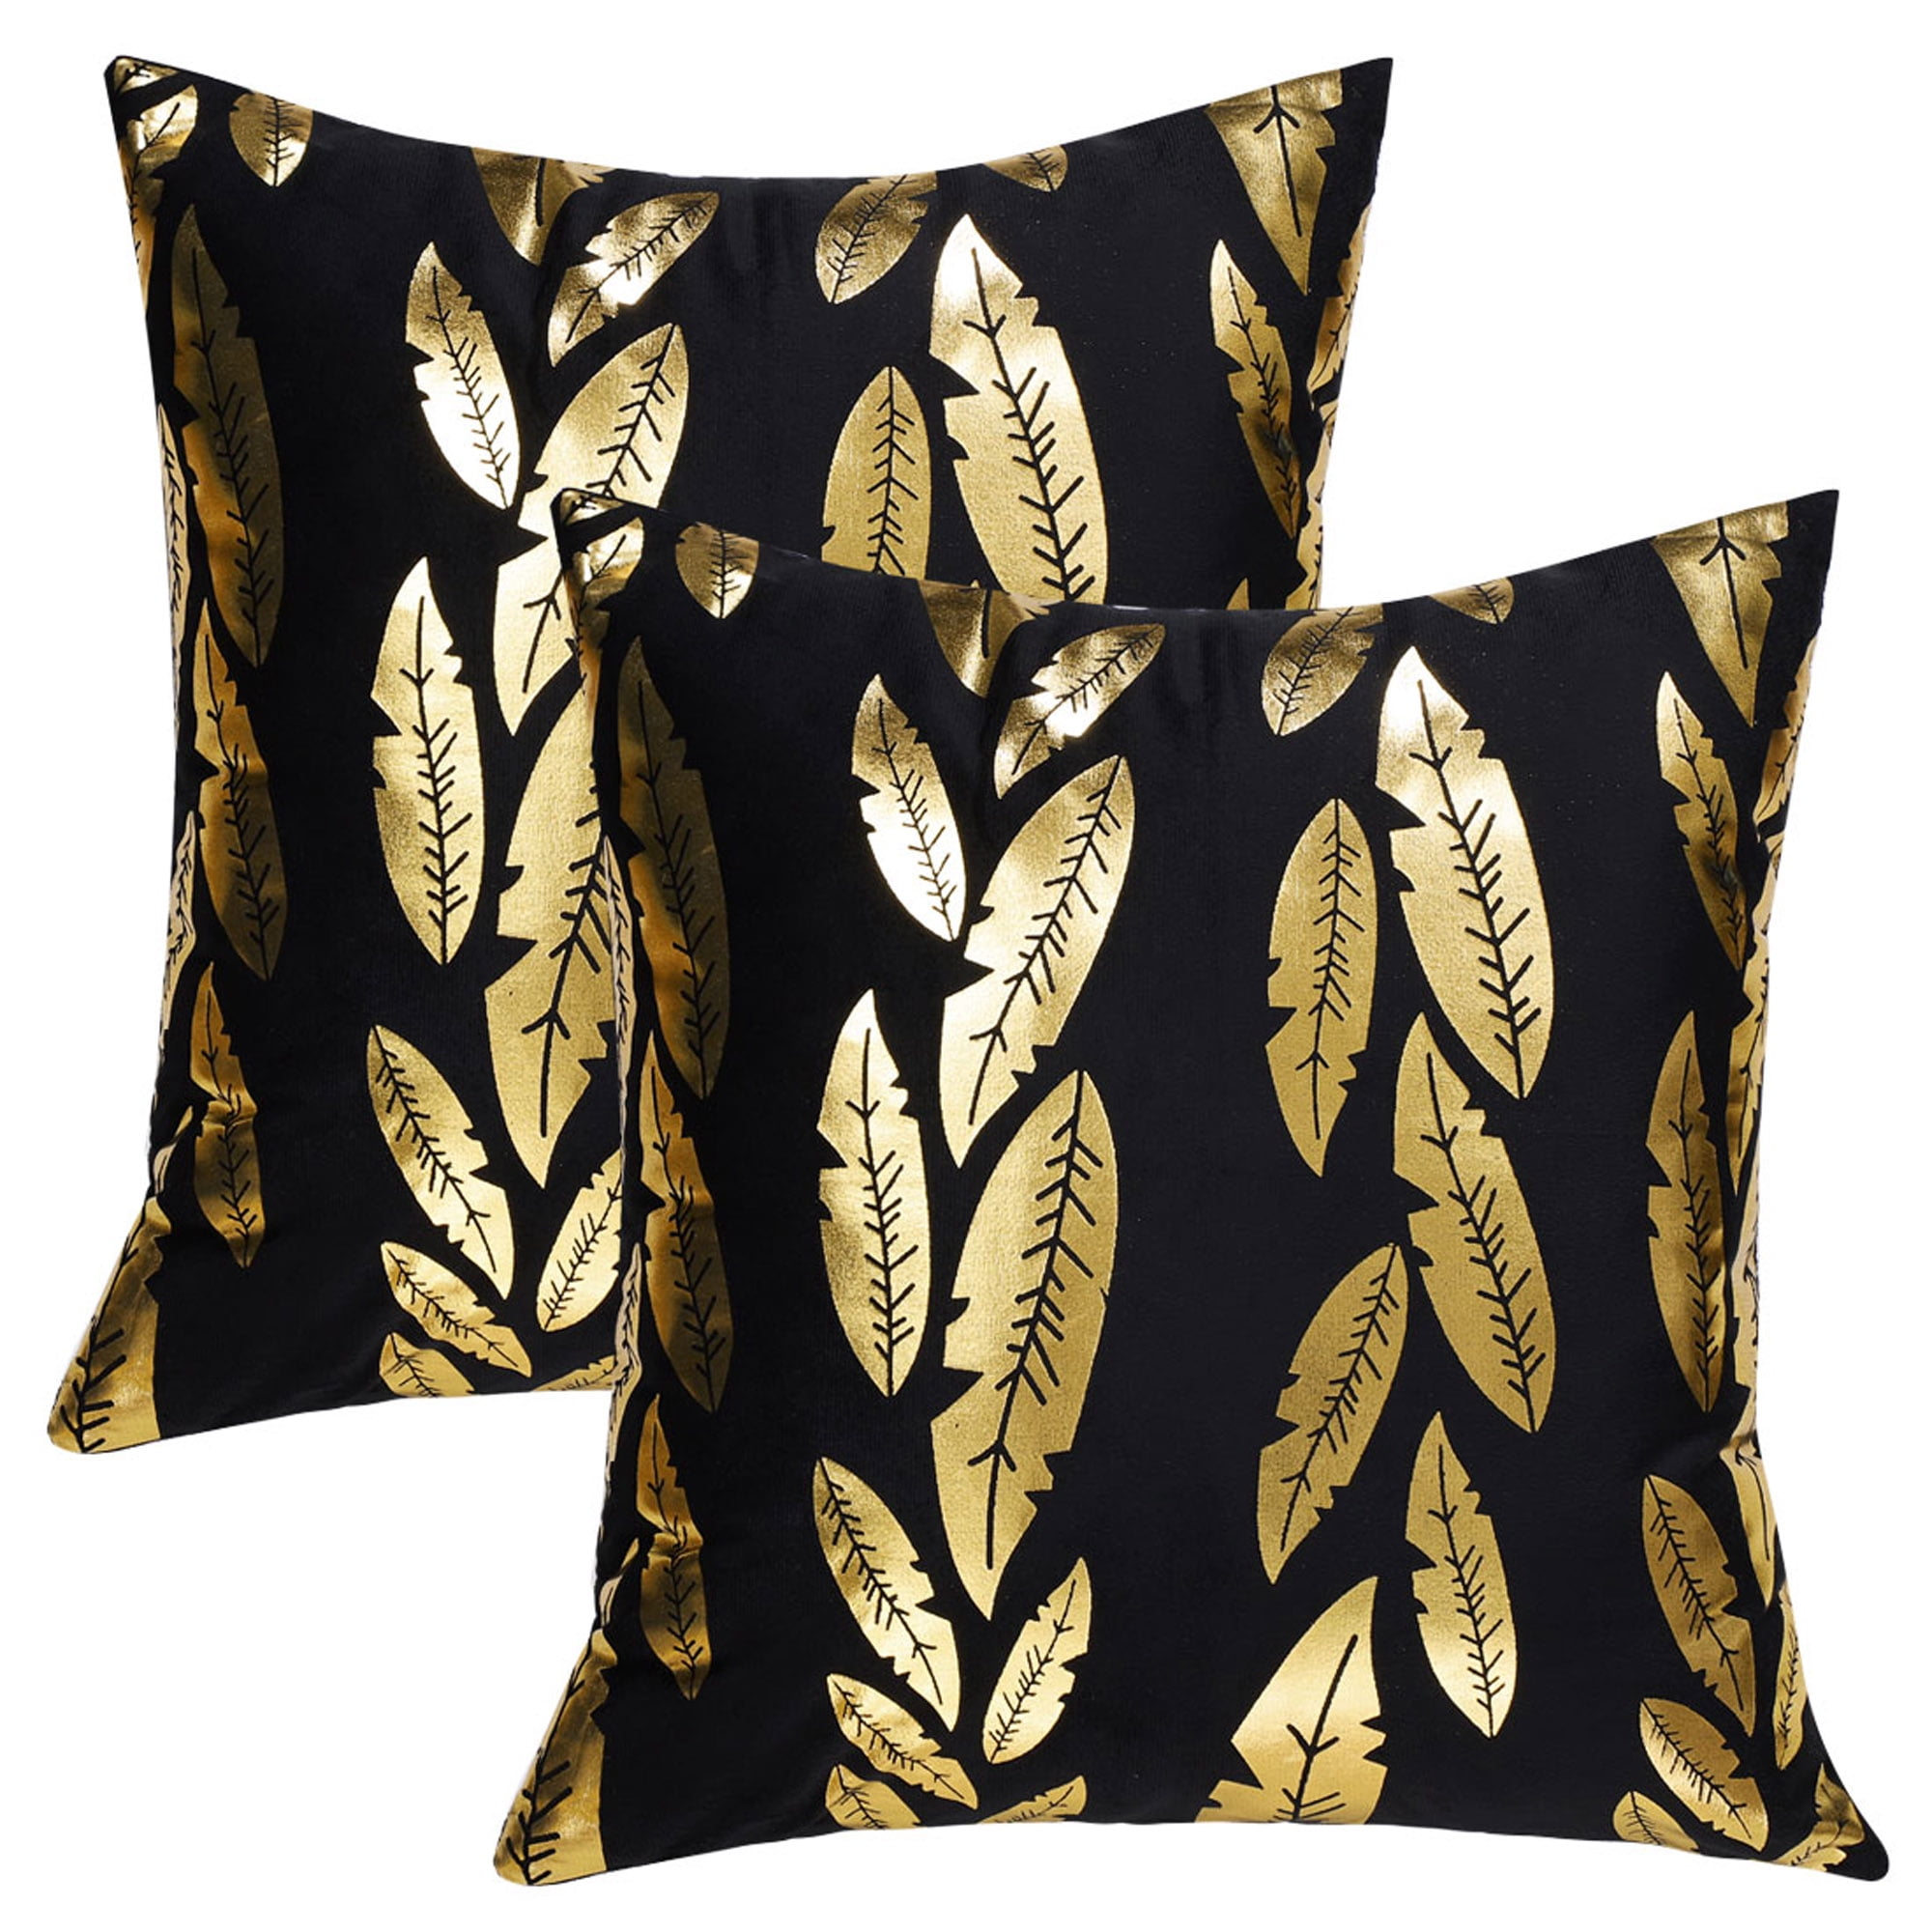 Summer Gold Pineapple Fruit Striped Throw Pillow Covers Pillowcase Zippered Square Decorative Cushion Cases 18x18 Inches For Couch Sofa Chair Car Bedroom Living Room material shown in the video 